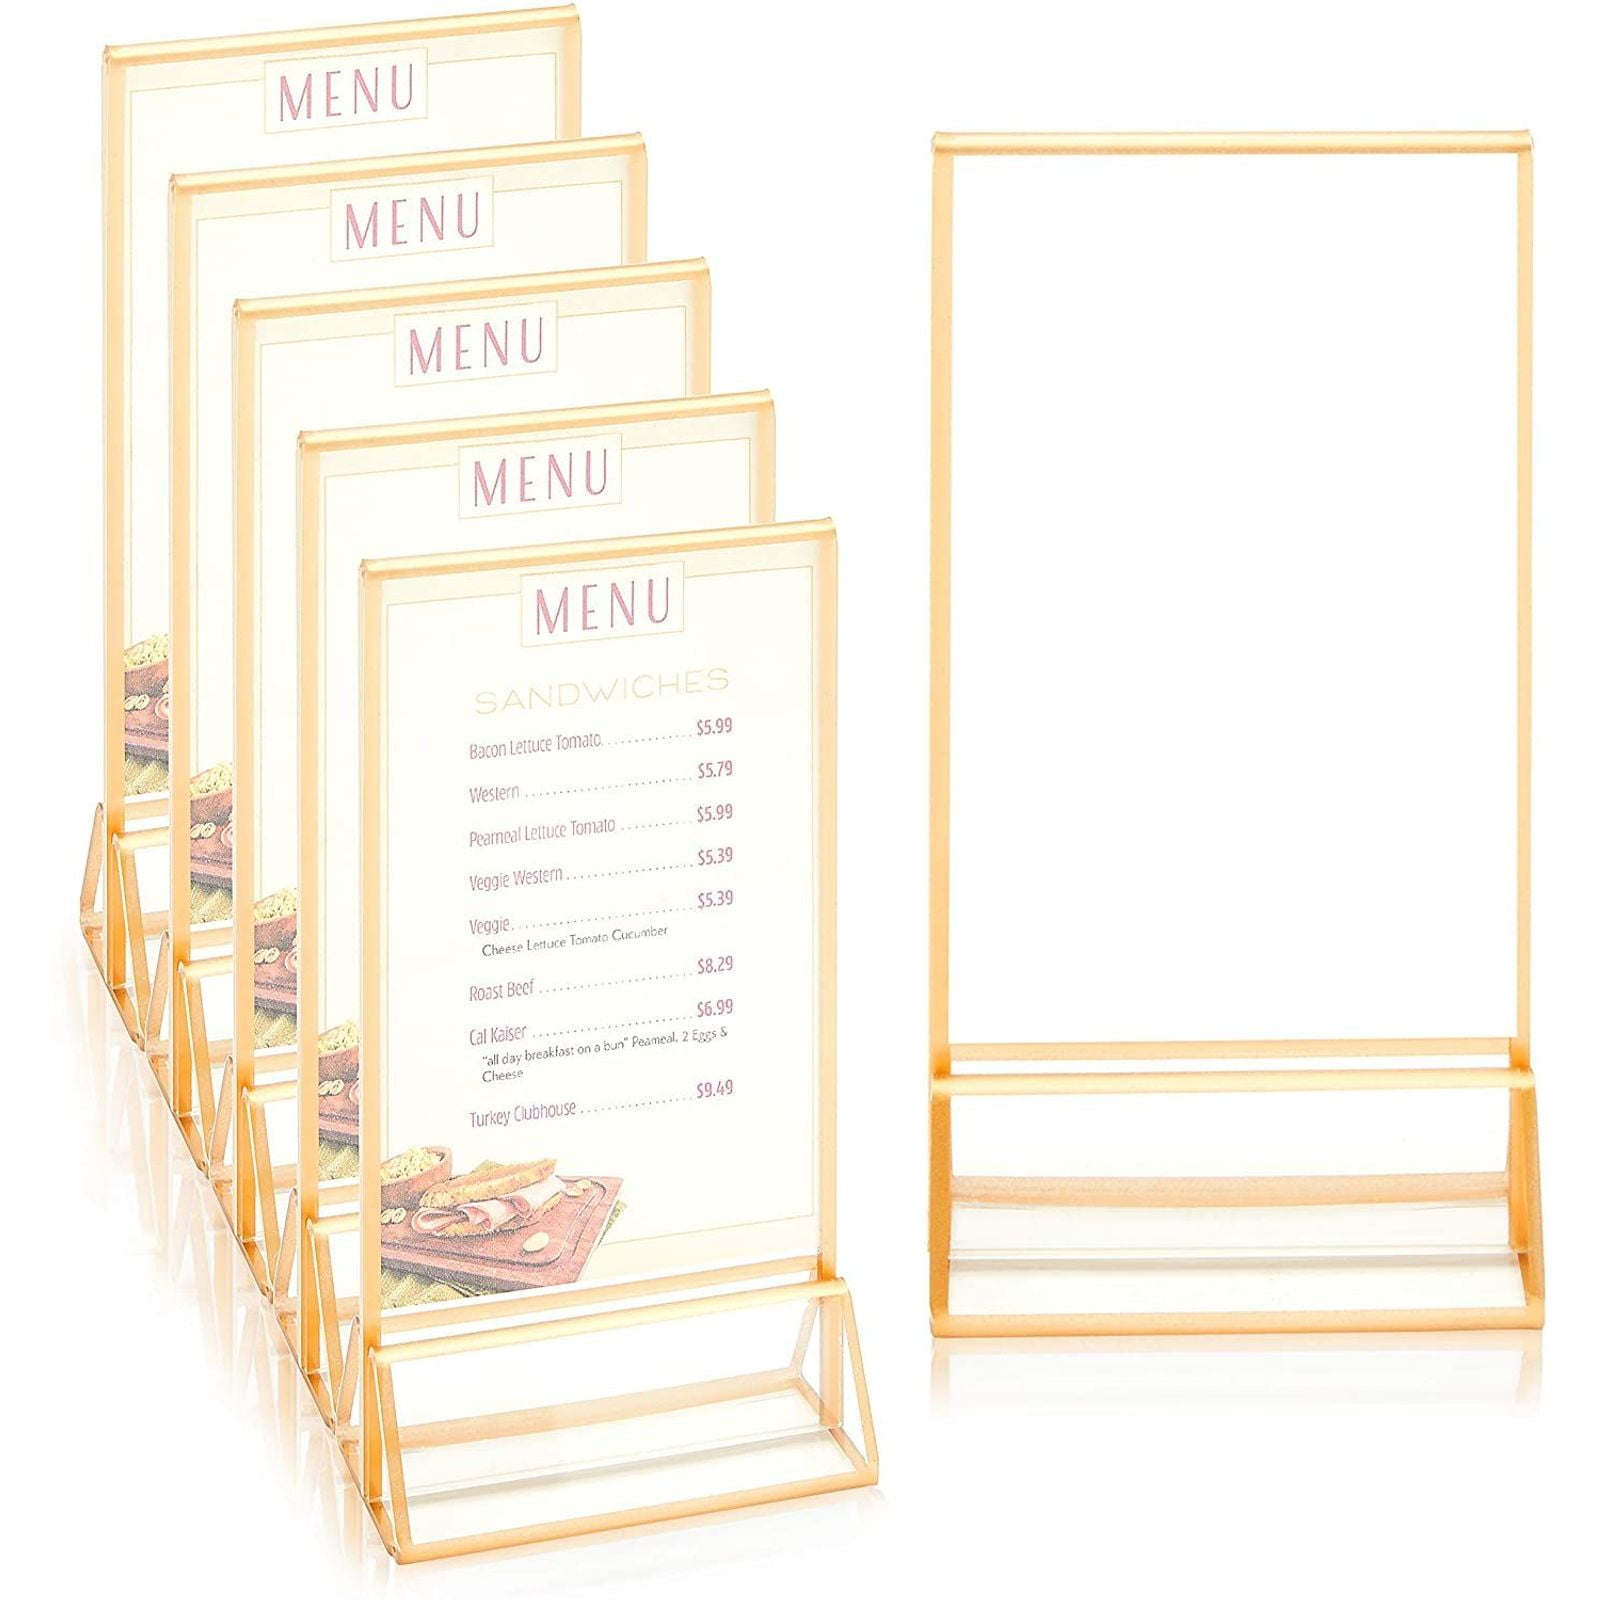 ACRYLIC MENU SIGN POSTER HOLDER TABLE TOP BAR COUNTER DISPLAY PACK OF 10 